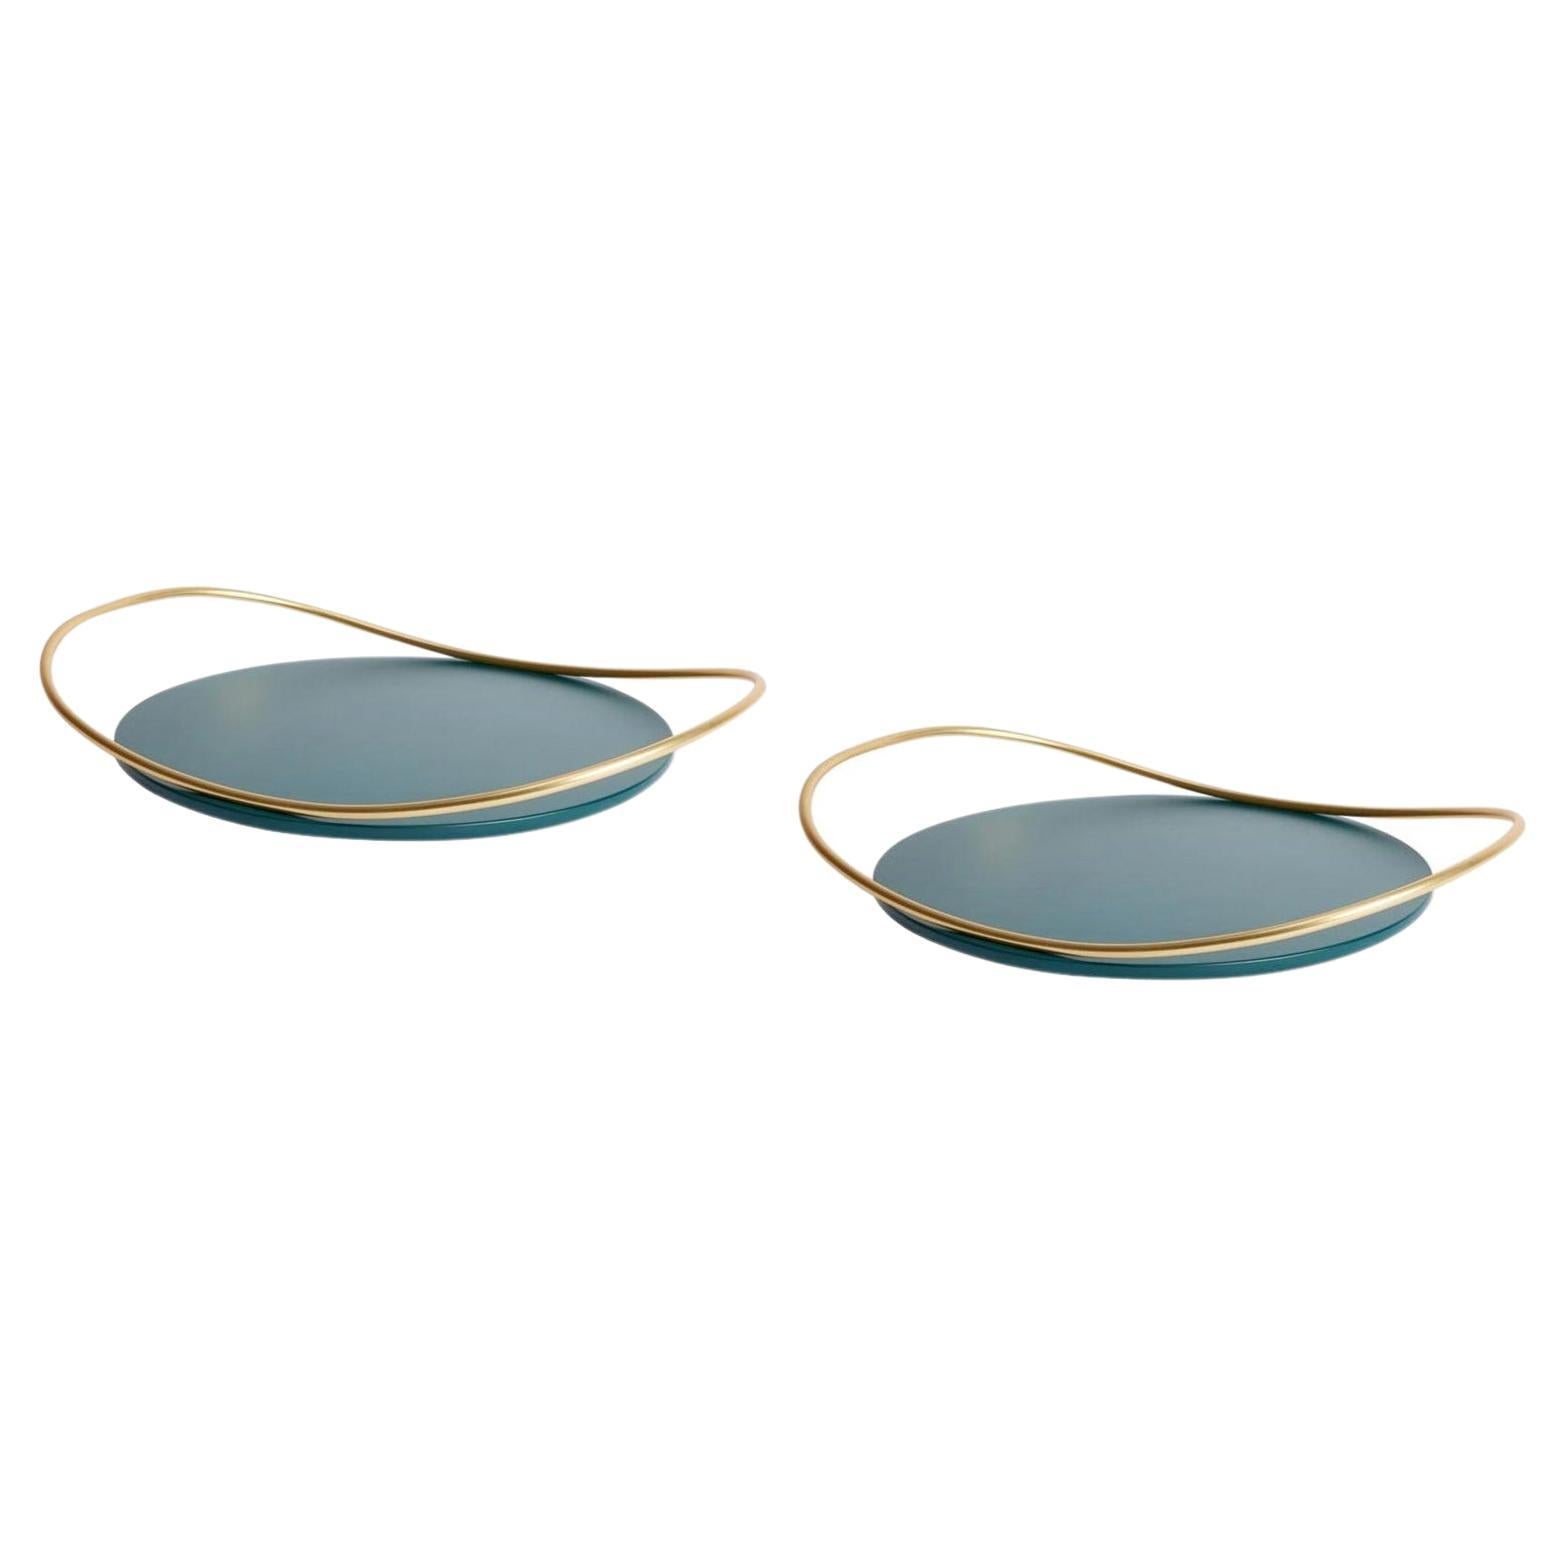 Pair of Petrol Green Touché B Tray by Mason Editions